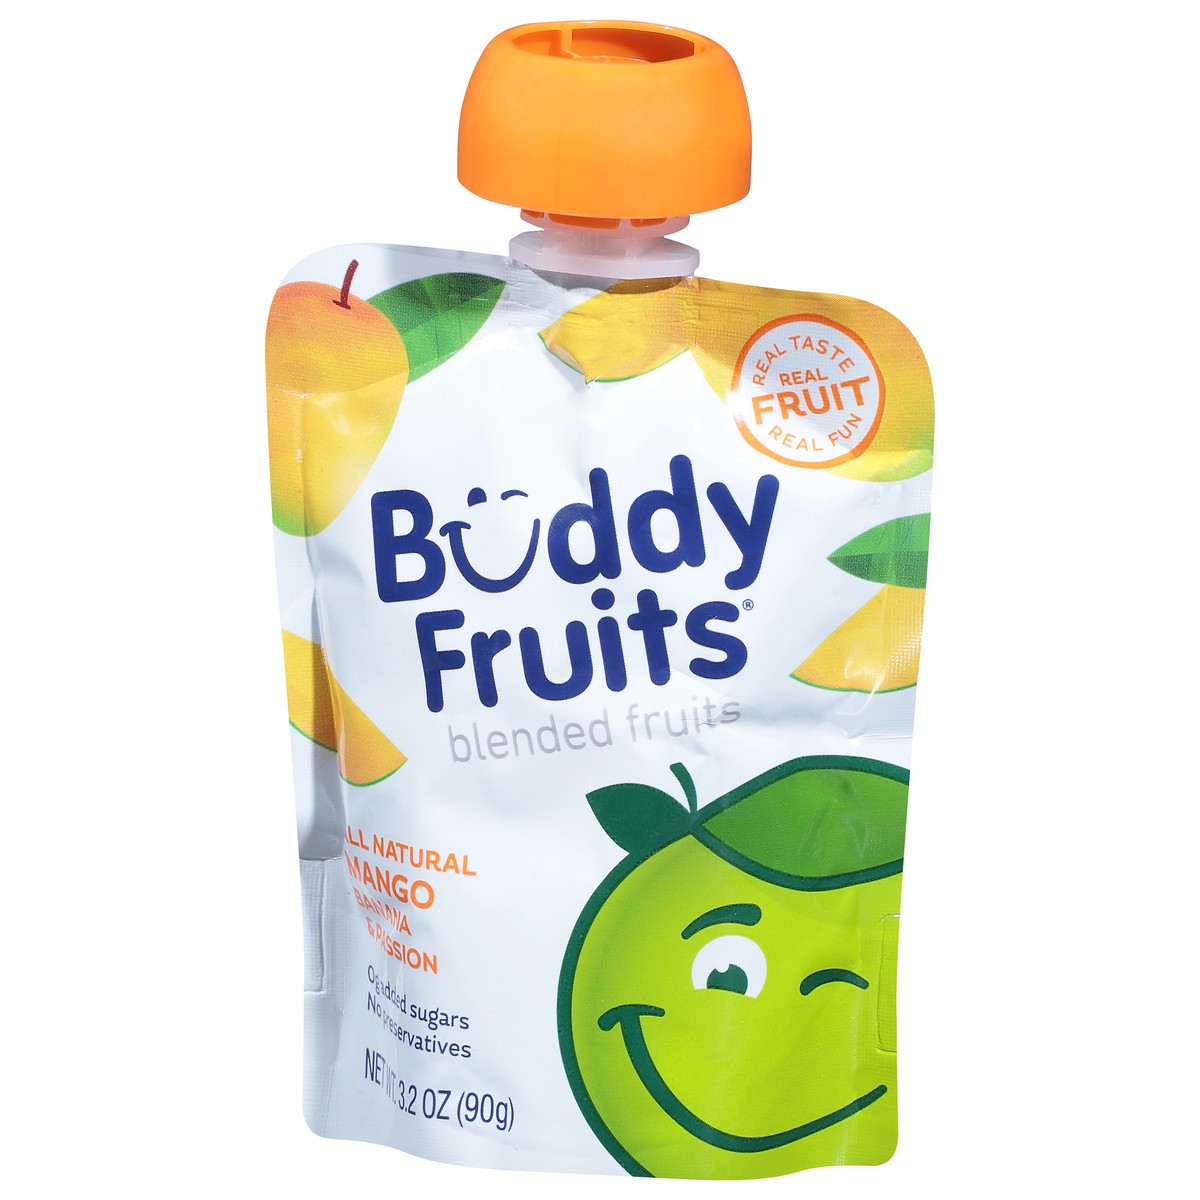 slide 3 of 9, Buddy Fruitss All Natural Mango, Banana & Passion Blended Fruits Pouch, 3.2 oz